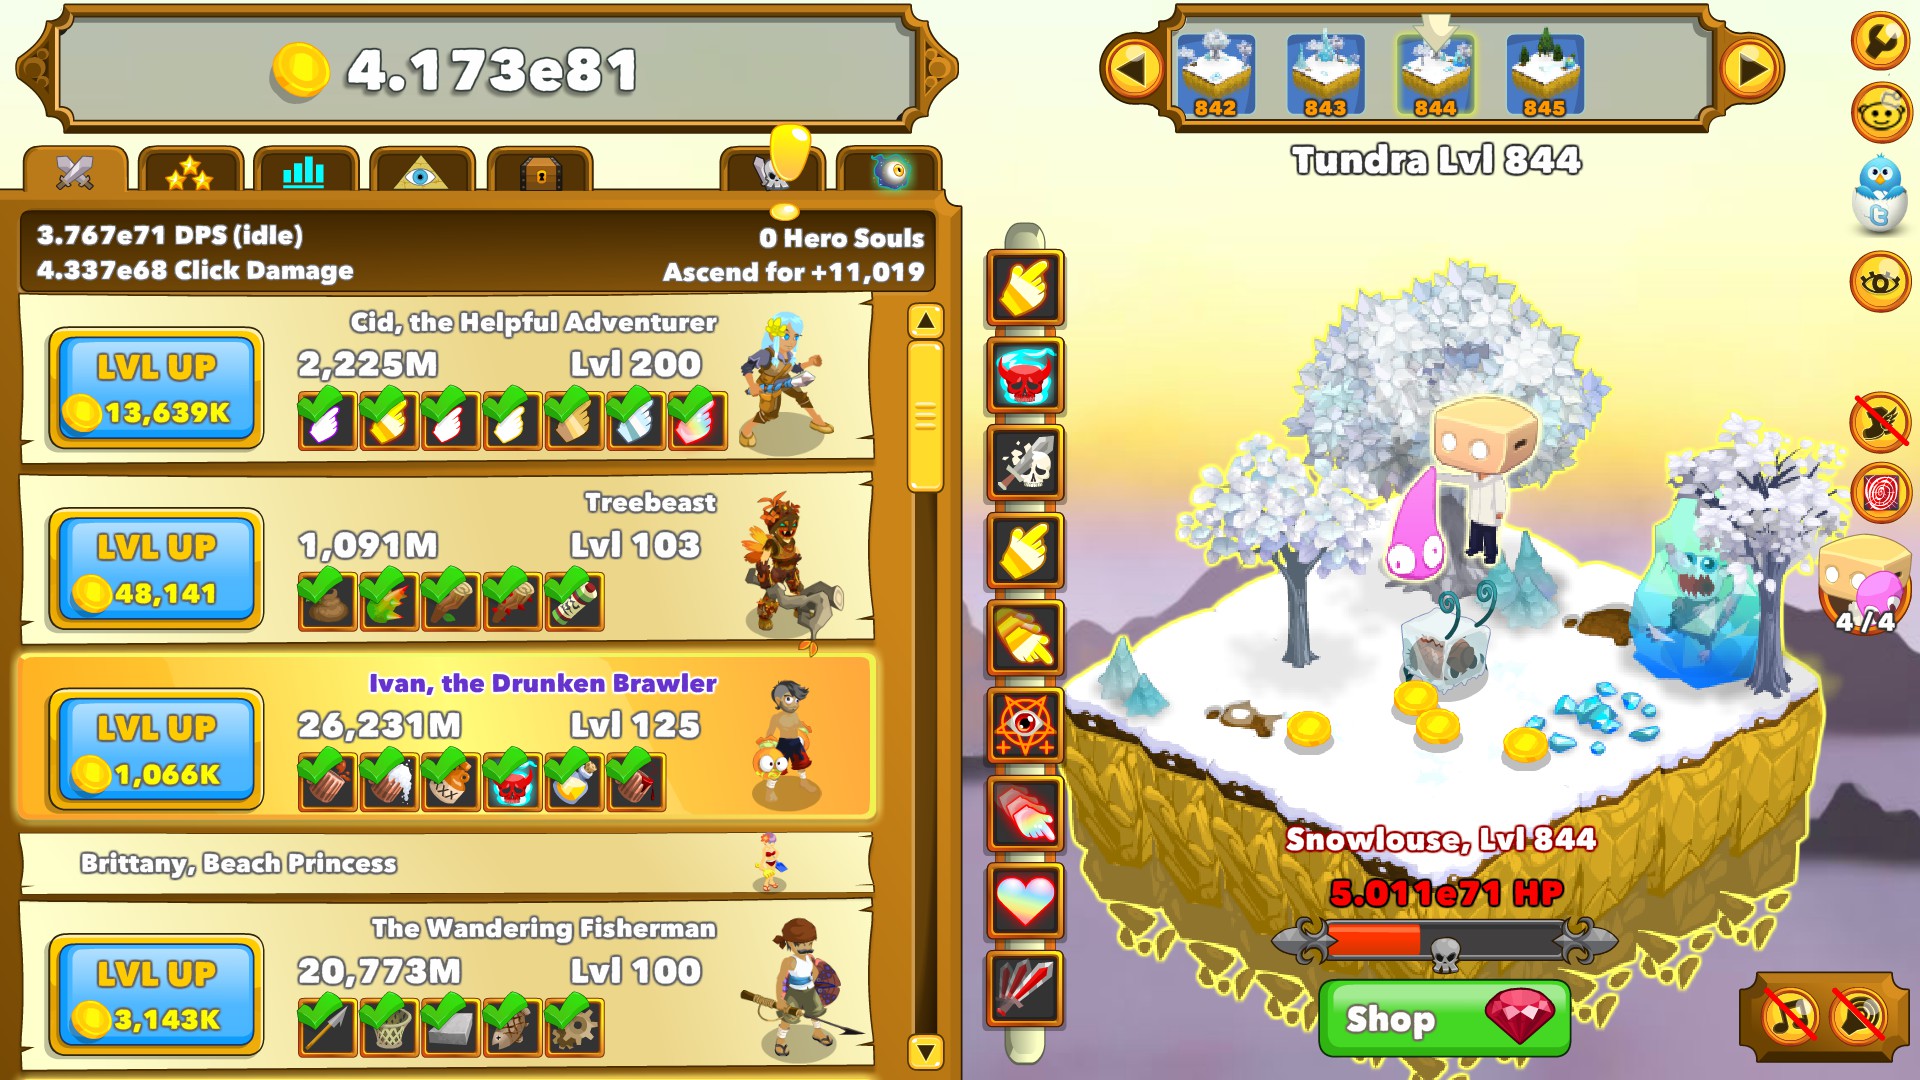 Click faster as the Zombie Auto-Clicker arrives for Clicker Heroes